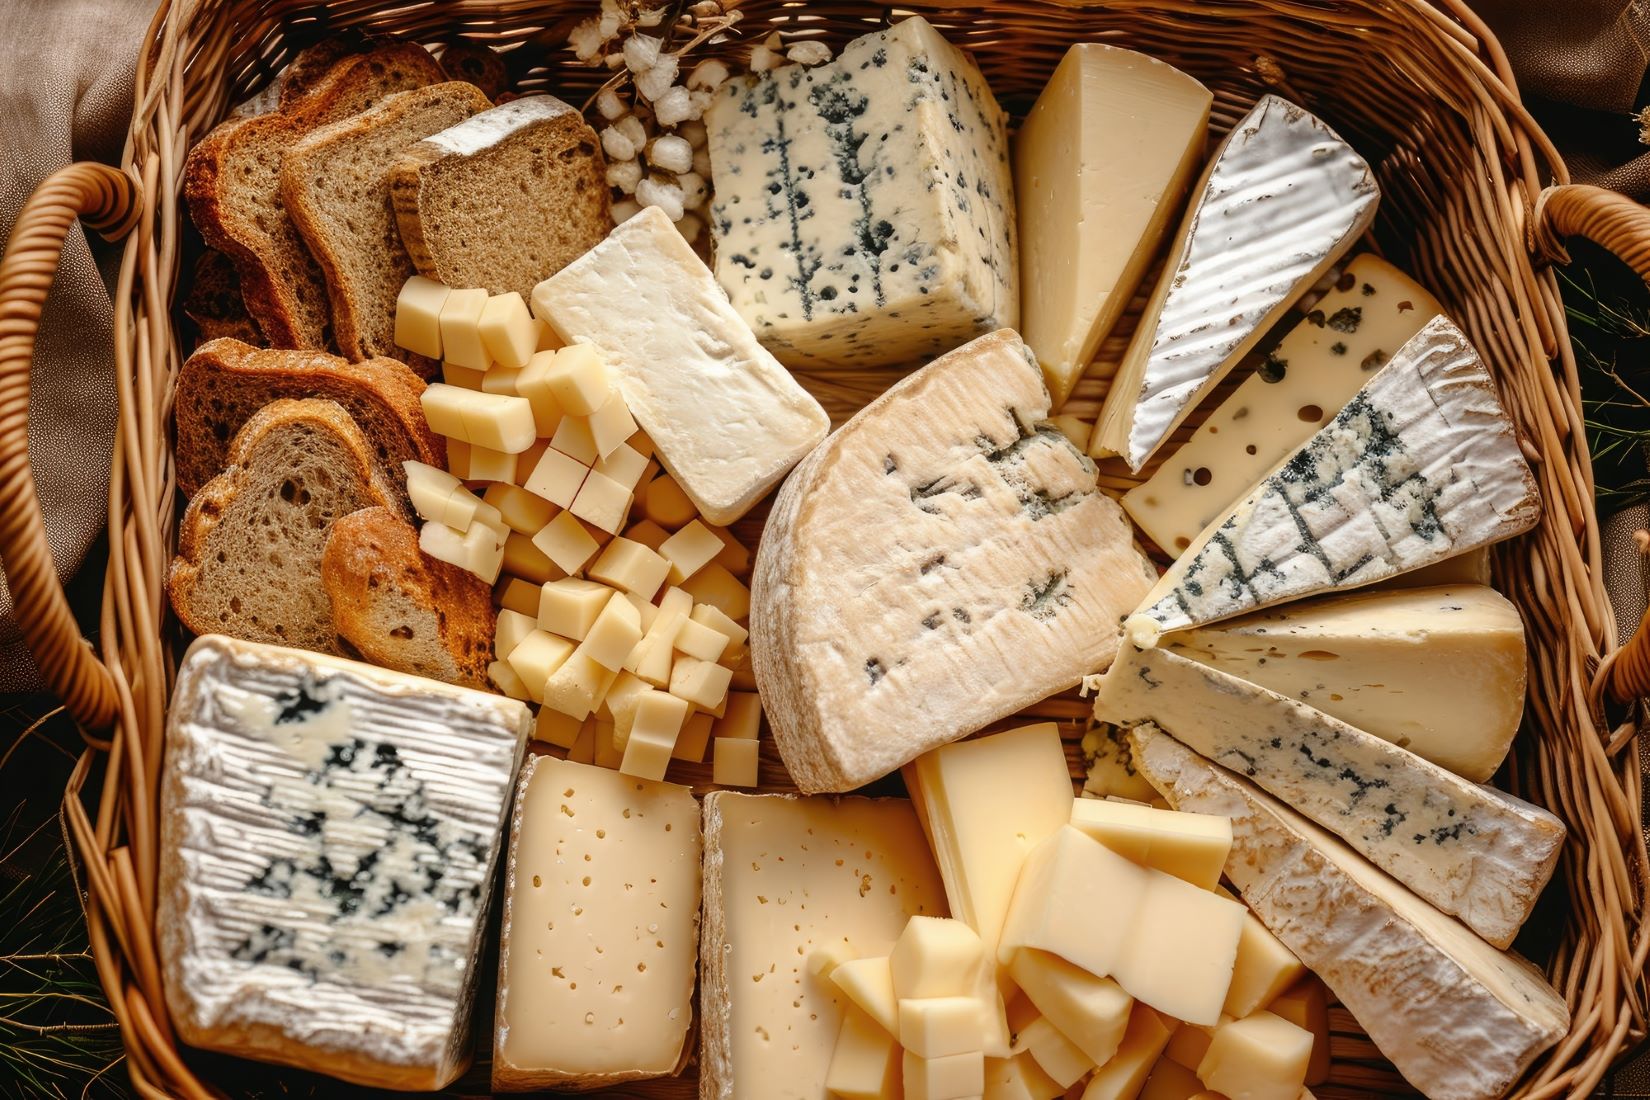 An image of different varieties of cheeses.